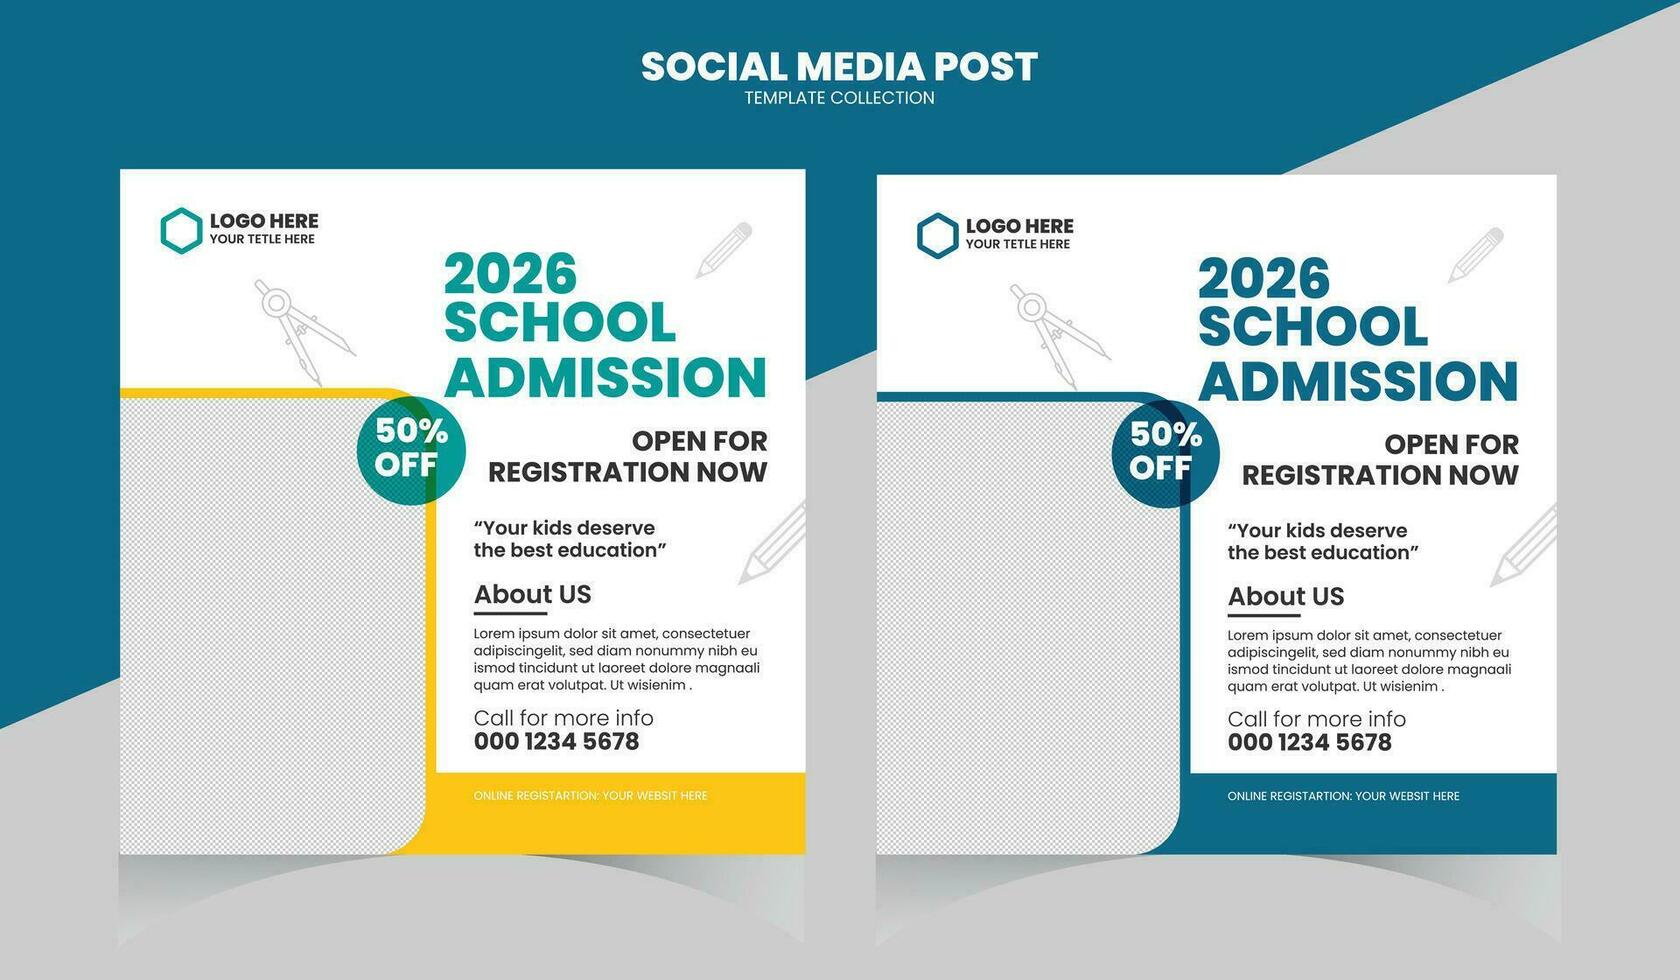 School education admission social media post and web banner vector